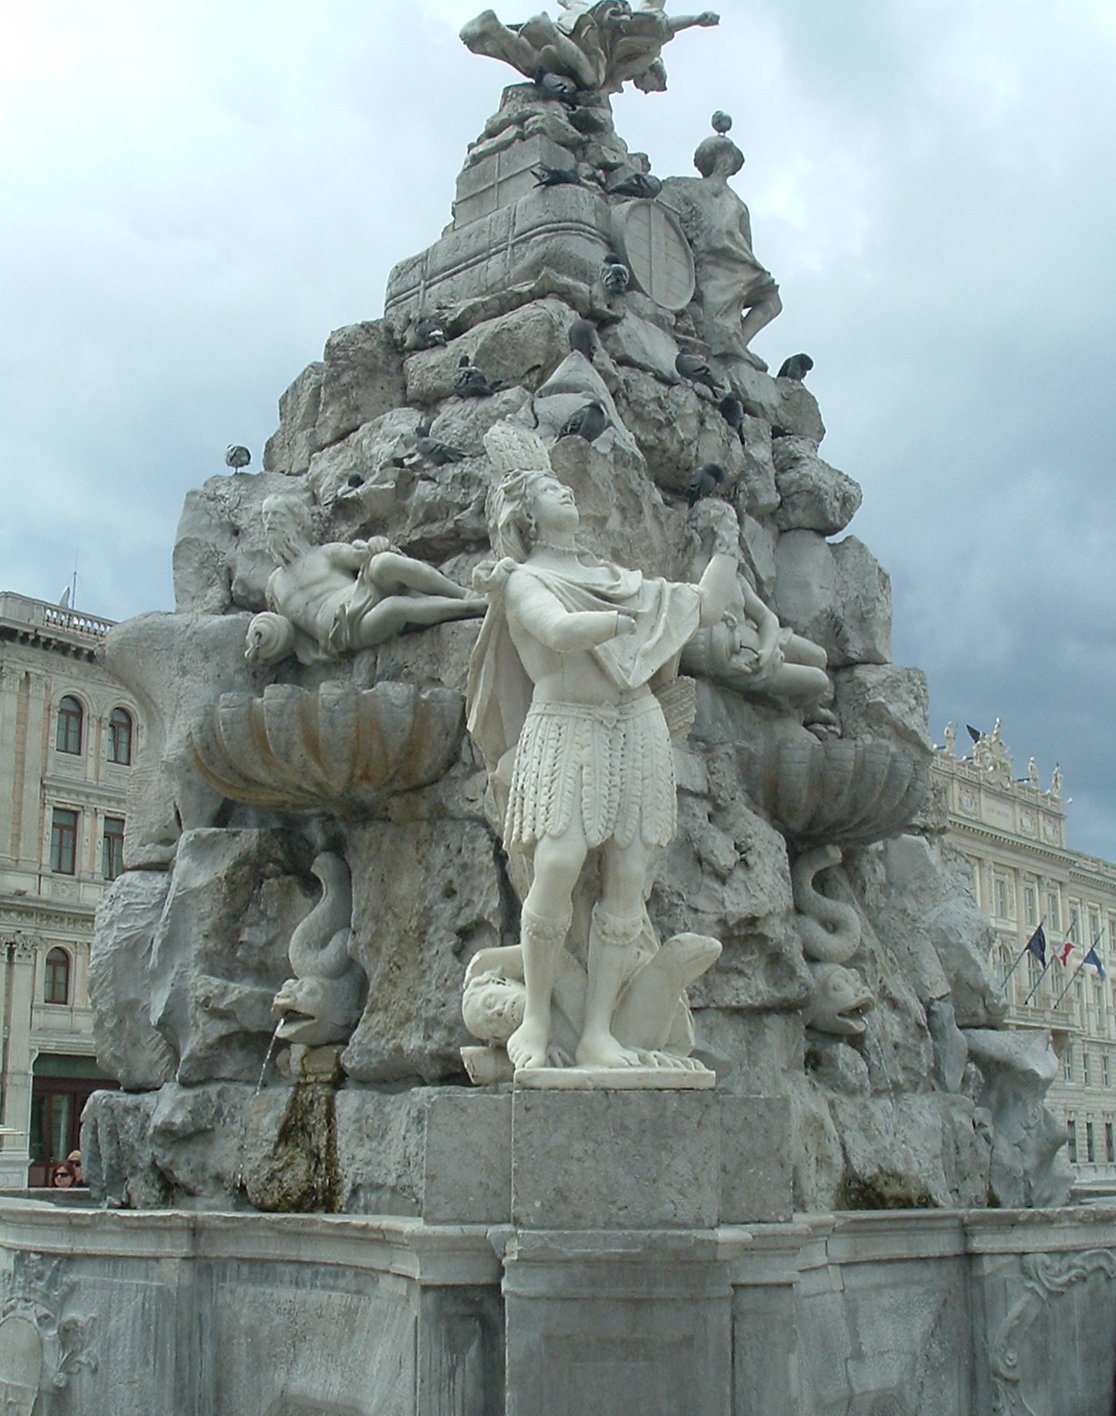 the statue has many sculptures of different people around it